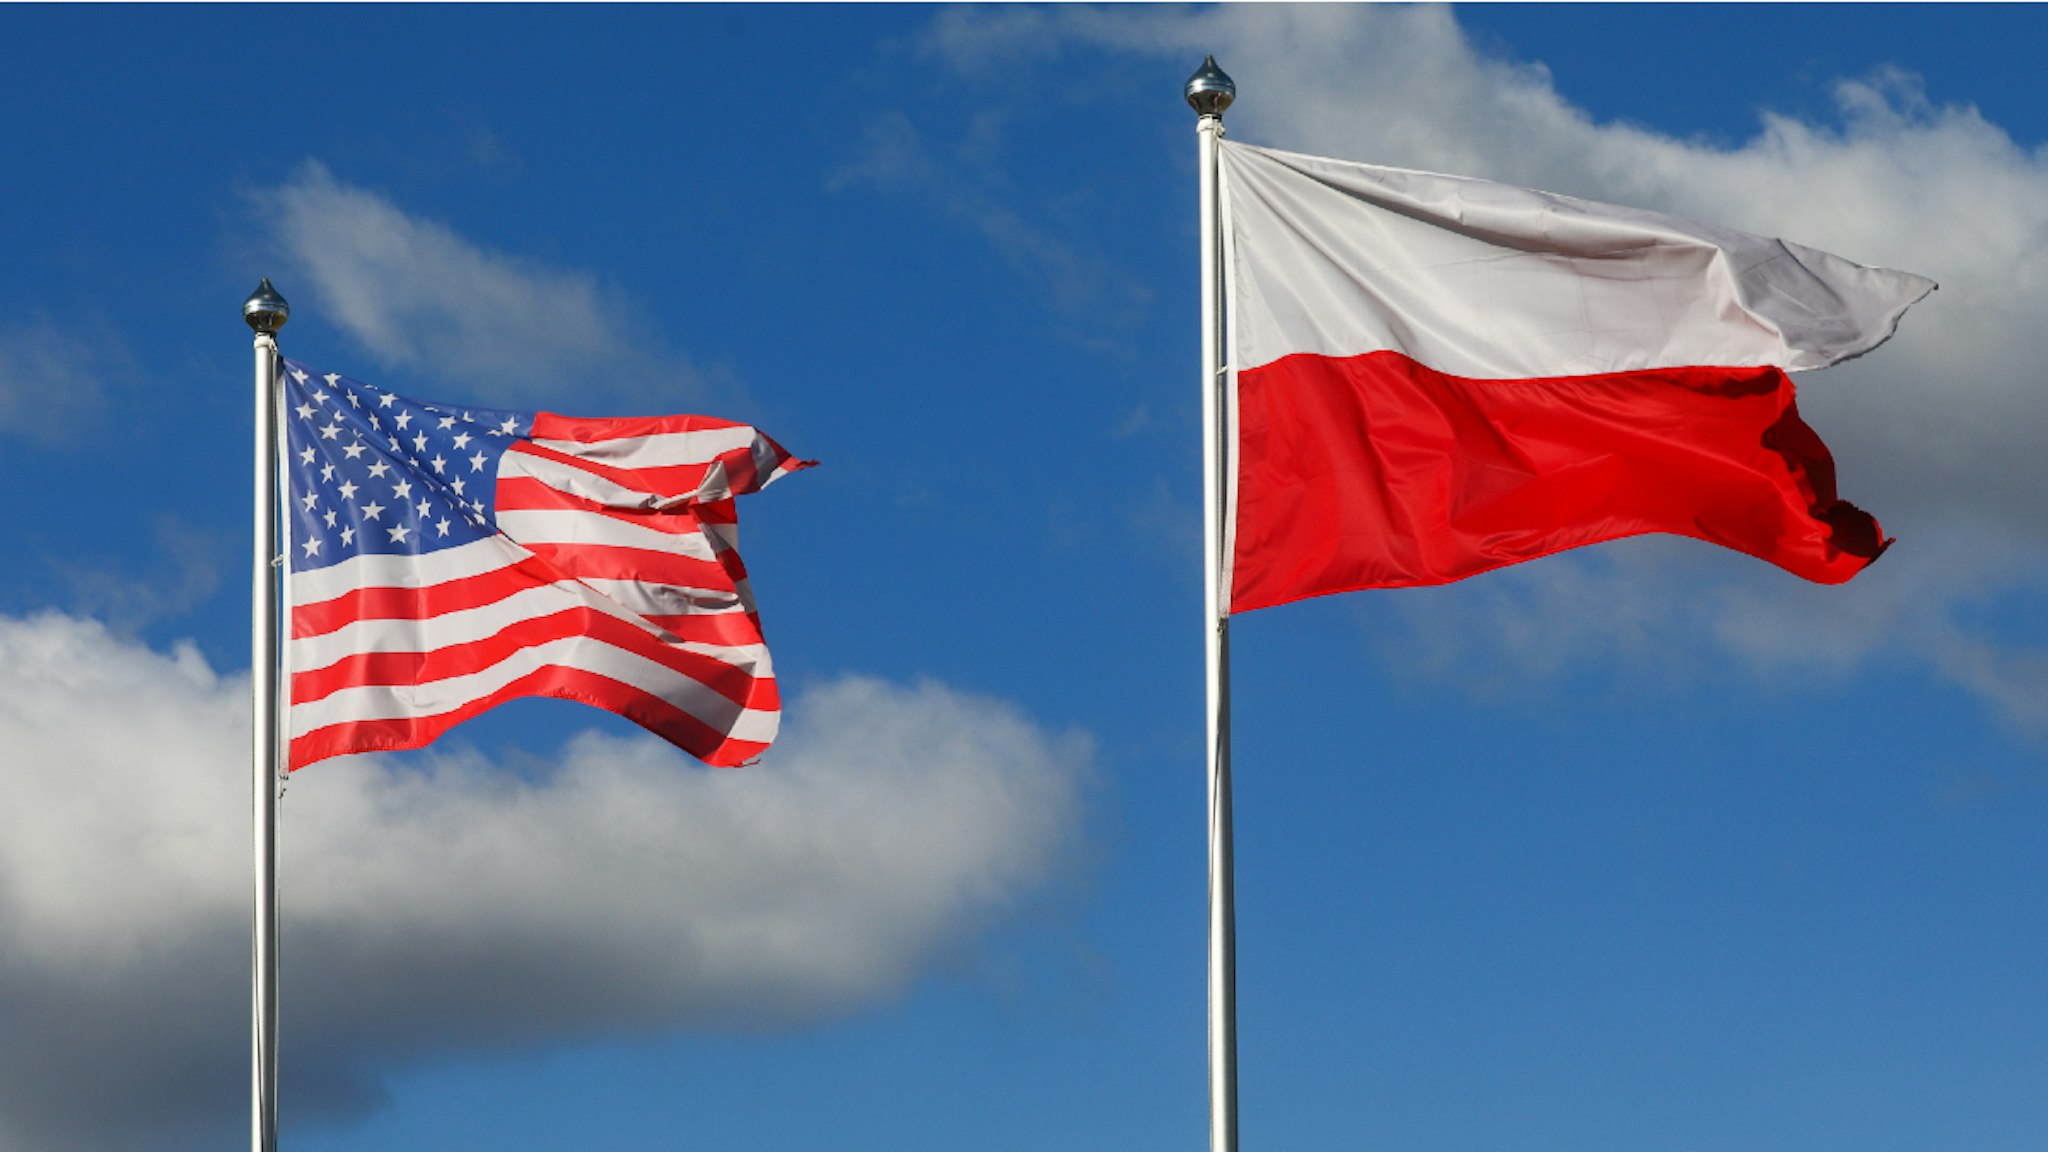 Polish and US national flags are seen at the Mielec Airport. Mielec, Poland on February 12, 2022. US troops have arrived as reinforcements for its various NATO allies in Eastern Europe, including Poland, as fears grow of a possible Russian invasion of Ukraine